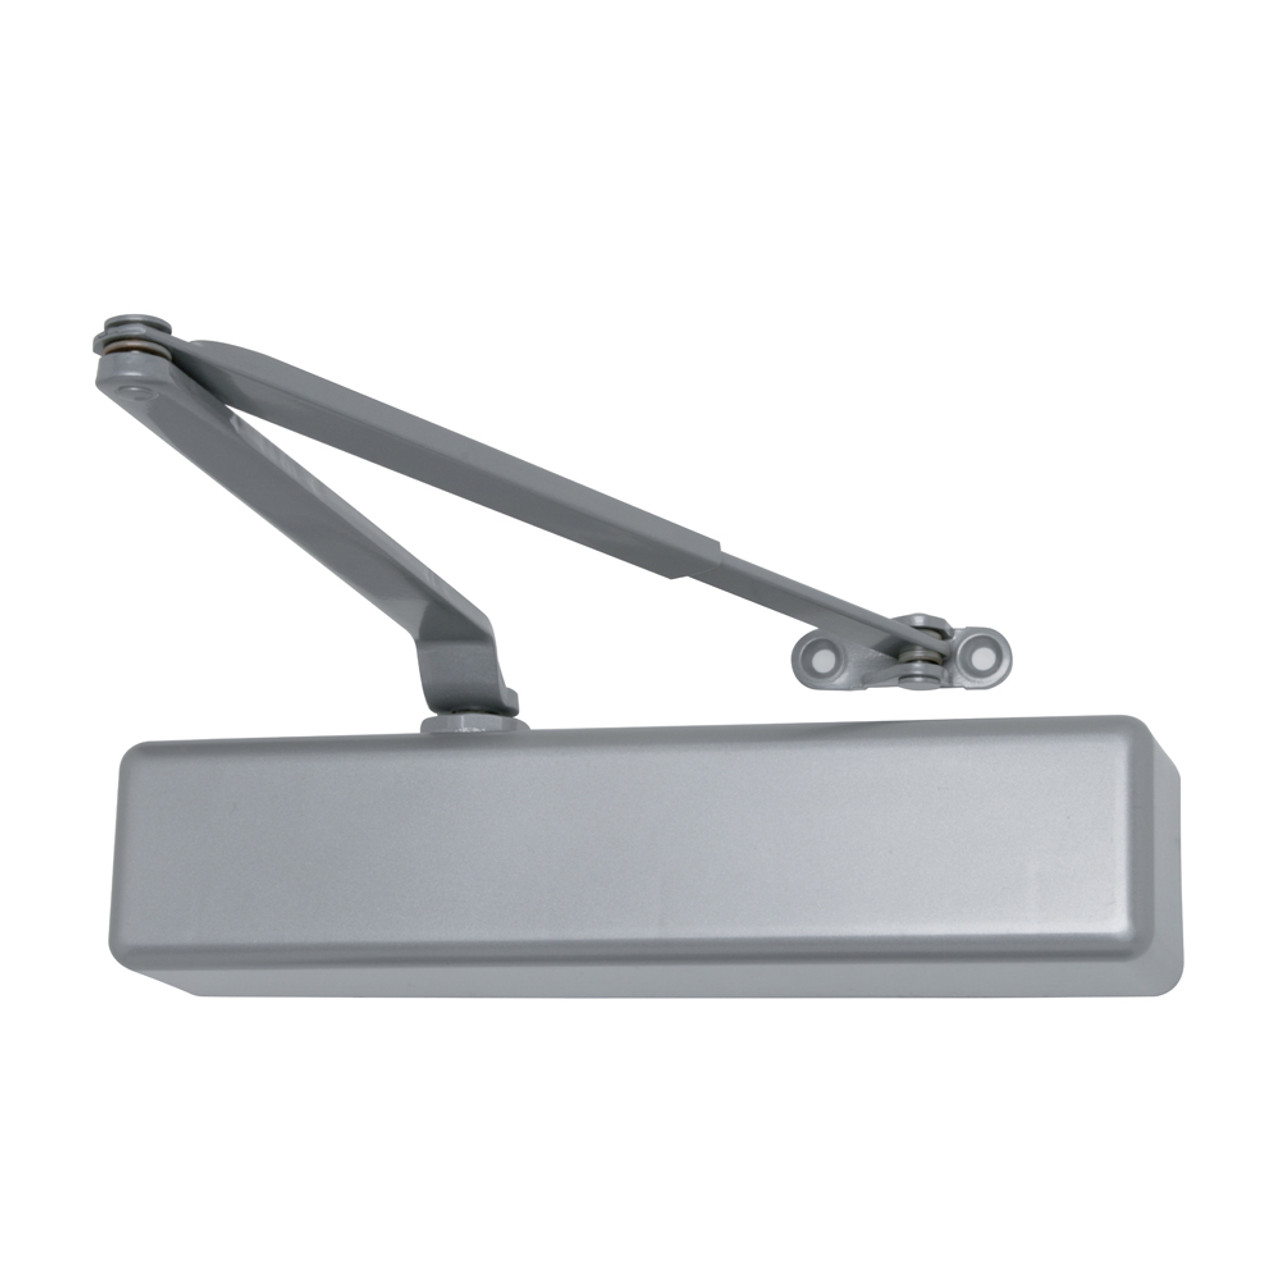 1461-HEDA-LH-AL LCN Door Closer with Hold Open Extra Duty Arm in Aluminum Finish